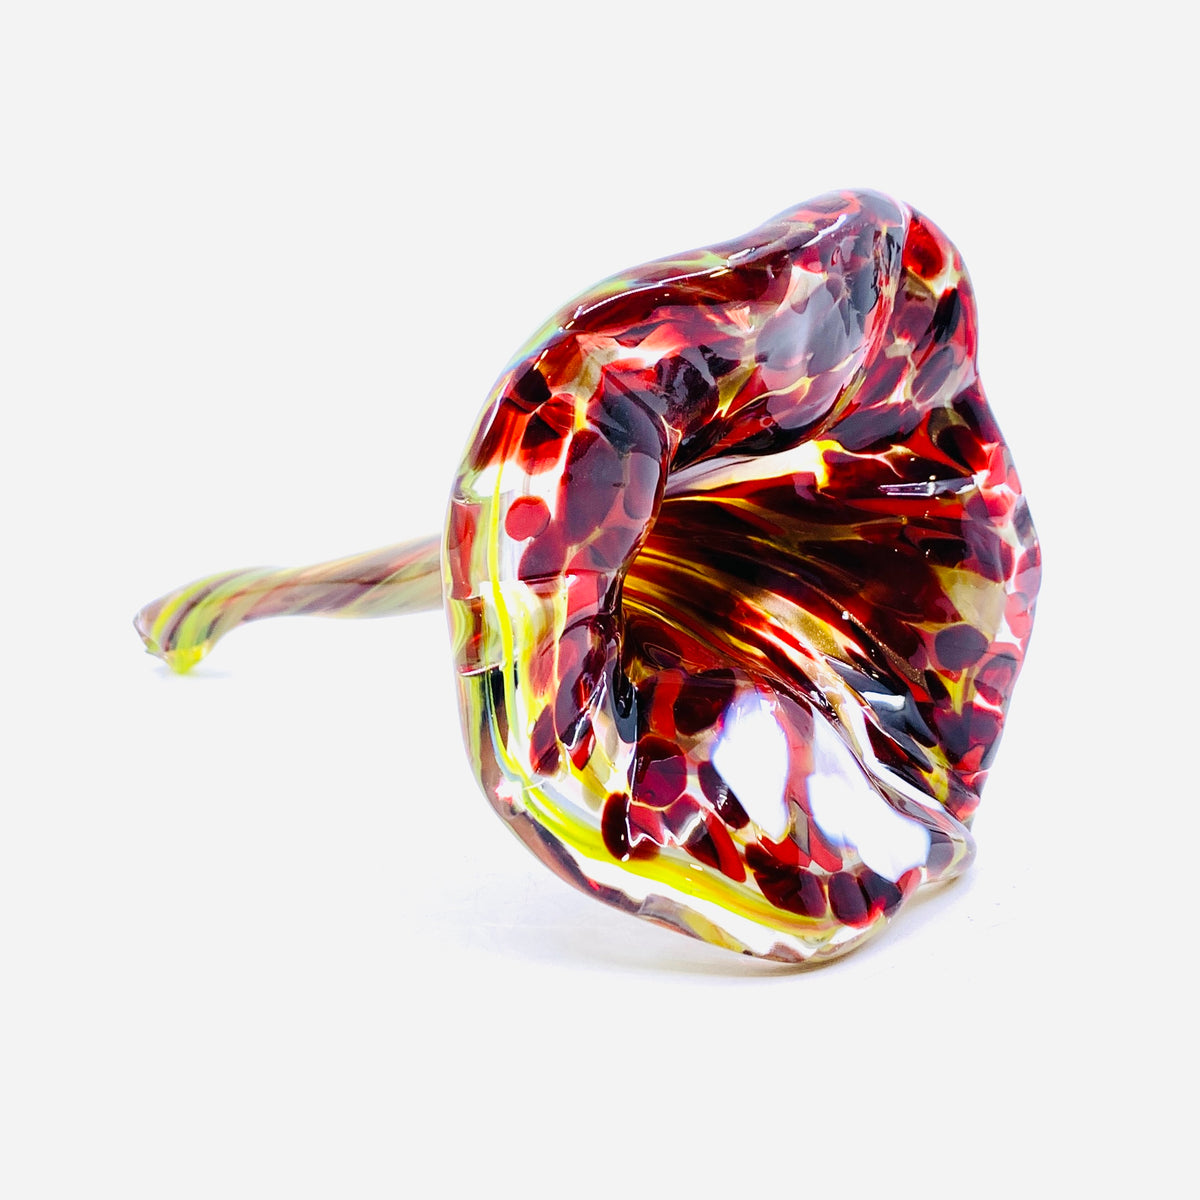 Pulled Glass Flower 606